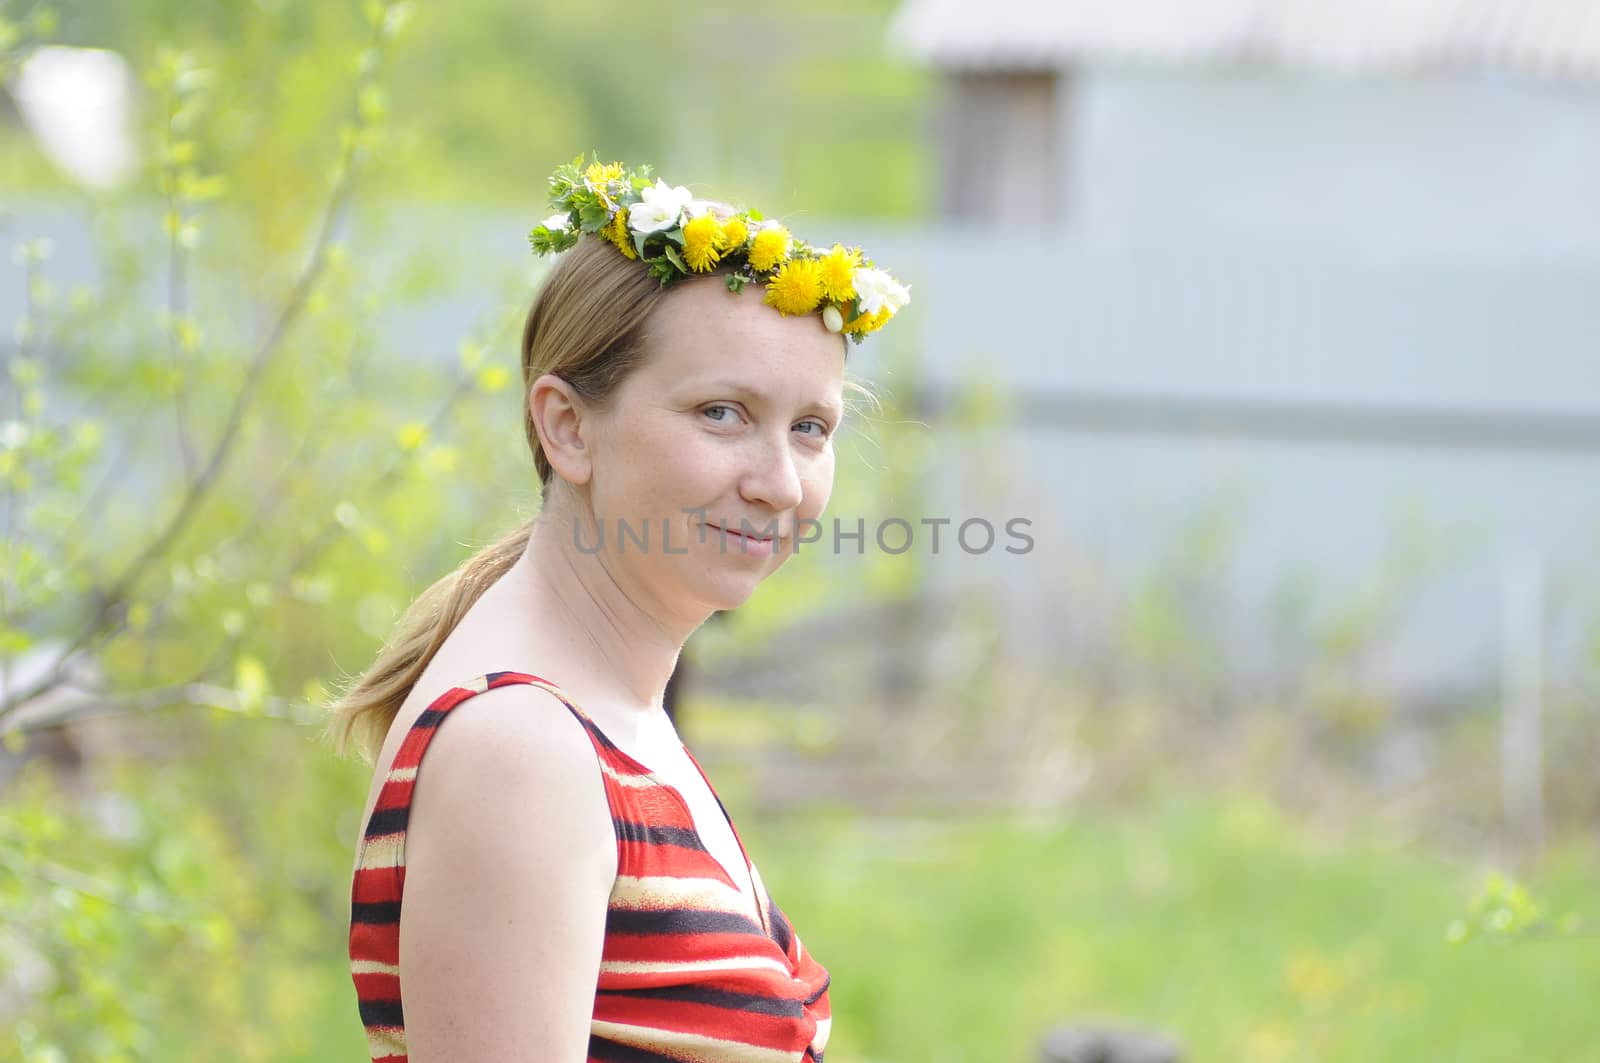 portrait of the happy woman with a wreath on the head. by veronka72